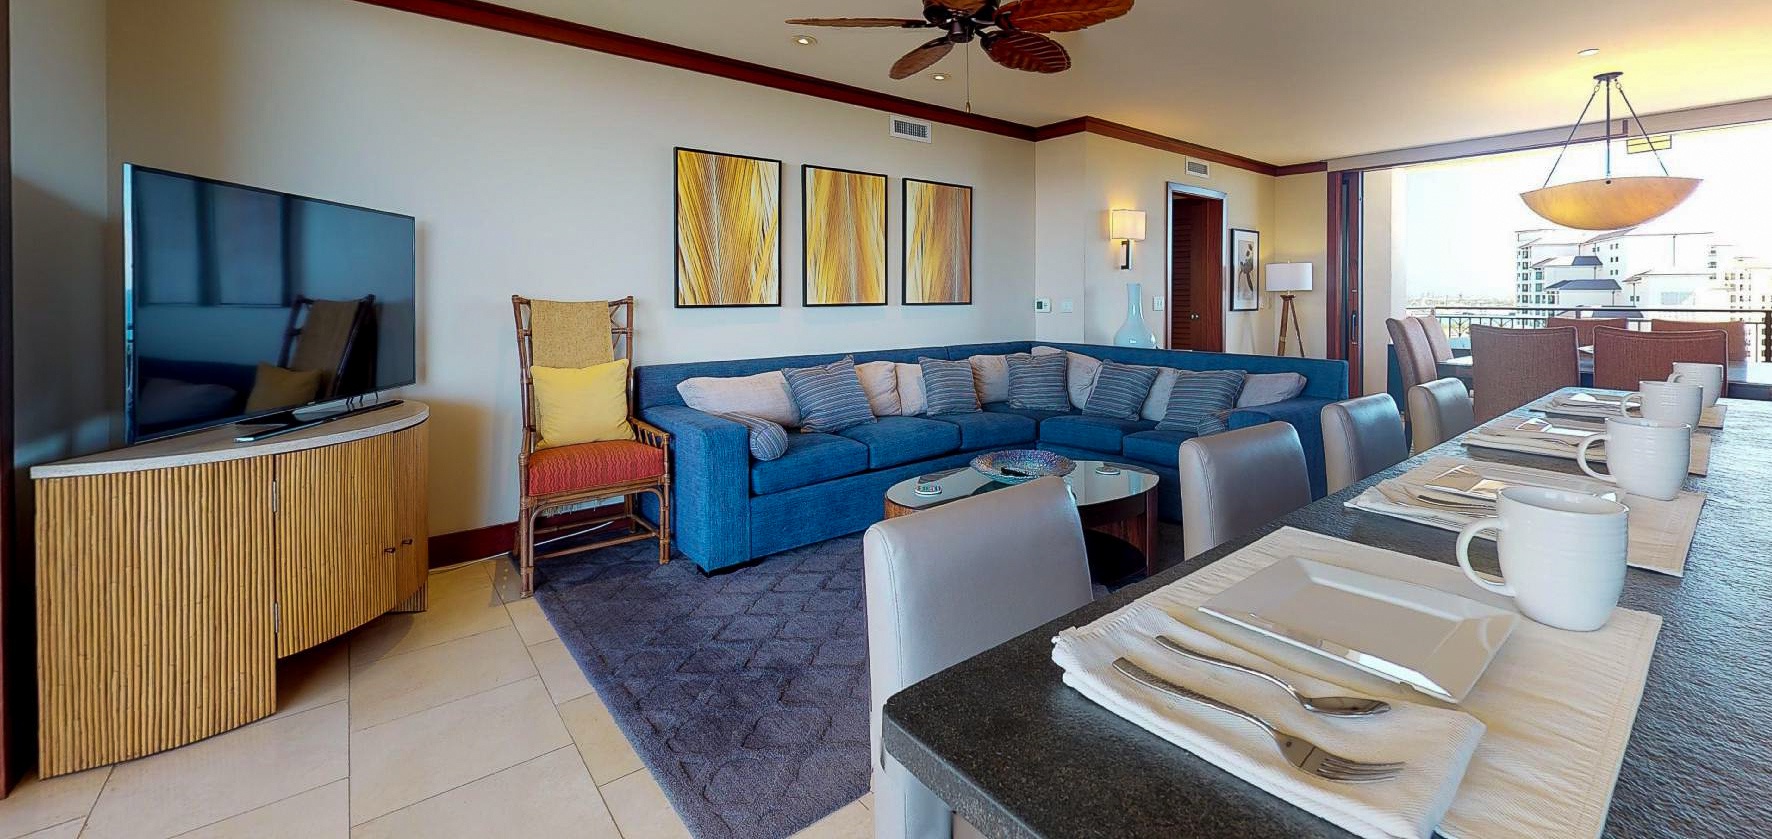 Kapolei Vacation Rentals, Ko Olina Beach Villas O1121 - The living area with TV and sectional.